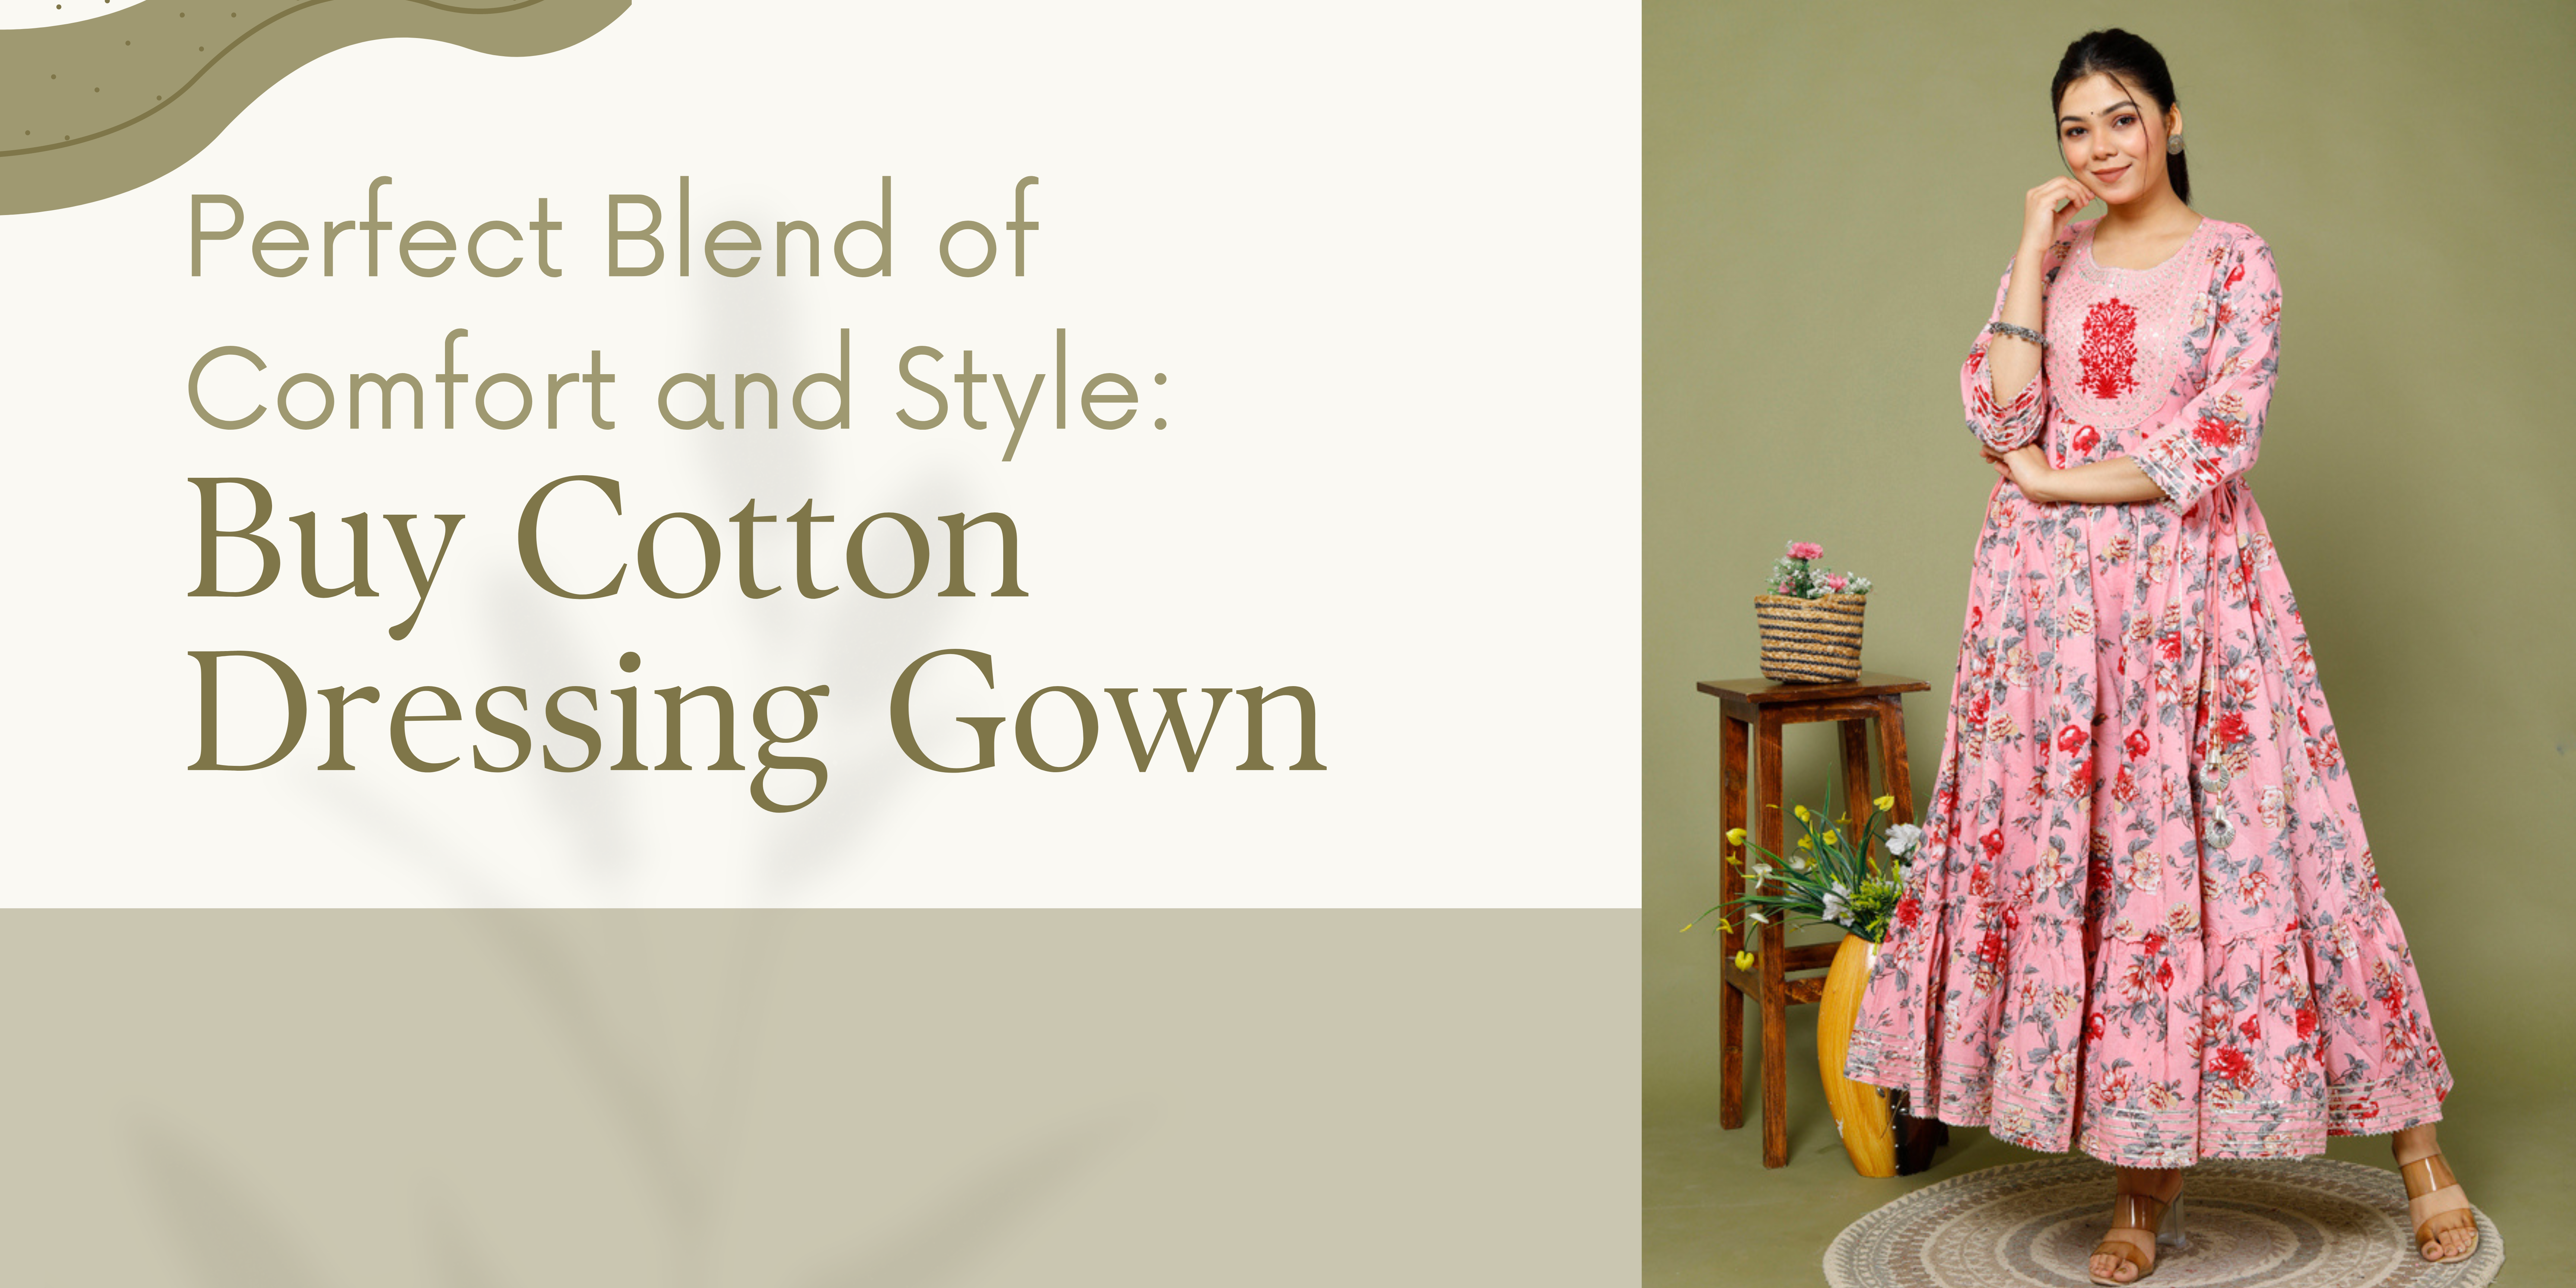 buy cotton dressing gown